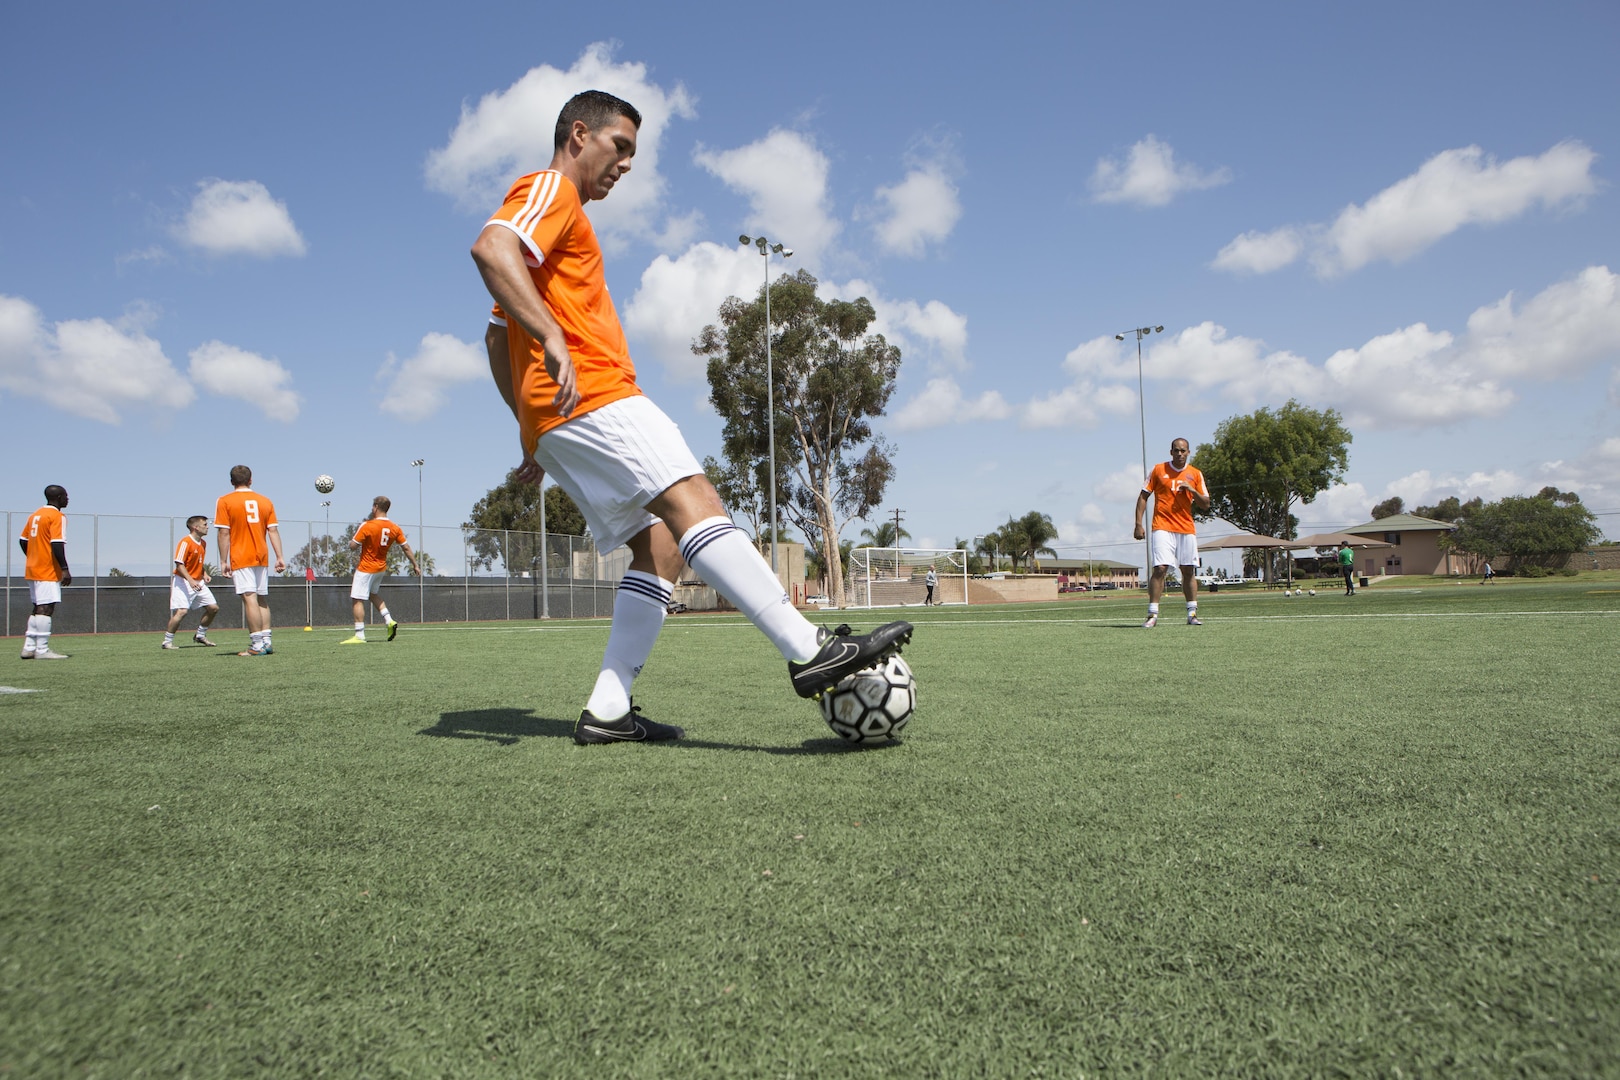 U.S. Armed Forces men's Navy soccer team warms up during the 2015 Armed Forces Men's Soccer Championship at the Miramar Sports Complex aboard Marine Corps Air Station Miramar, San Diego, Calif., May 14, 2015. The Armed Forces Champions are conducted by the Armed Forces Sports Council for the purpose of promoting understanding, good will and competition among the Armed Forces. (U.S. Marine Corps photo by Lance Cpl. Travis Jordan/Released)